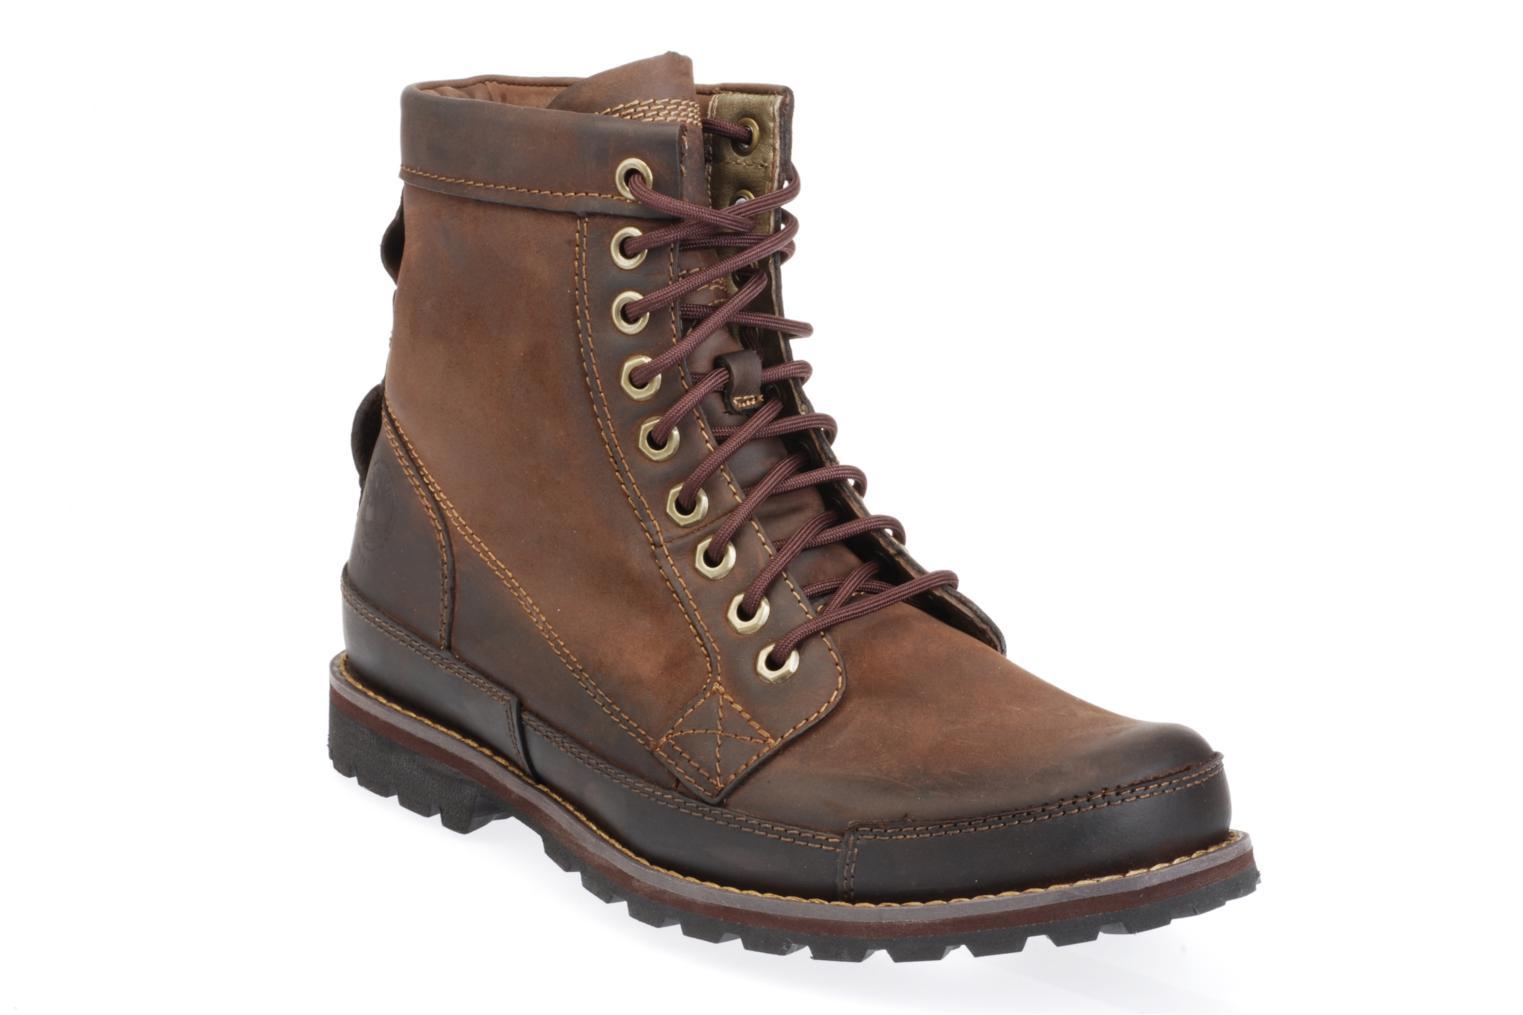 Foto Botines Timberland Earthkeepers Hombre foto 396353